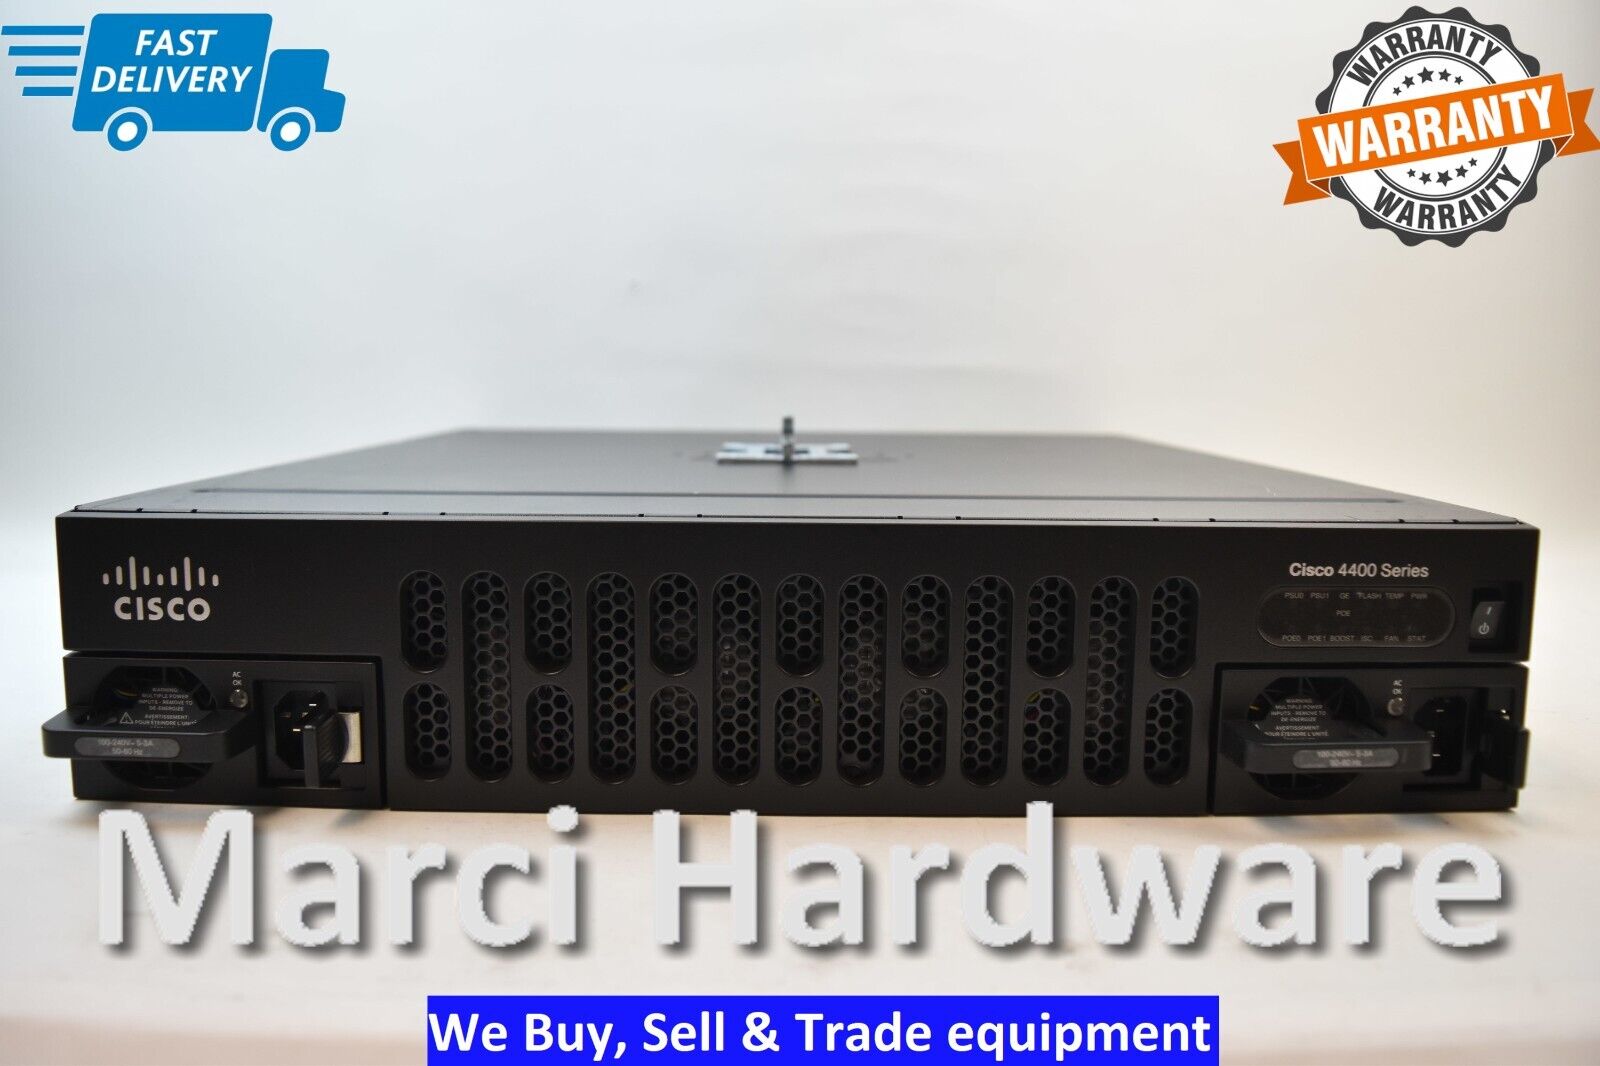 Cisco ISR4451-X/K9 v07 Router 4451 with Dual AC power Supplies